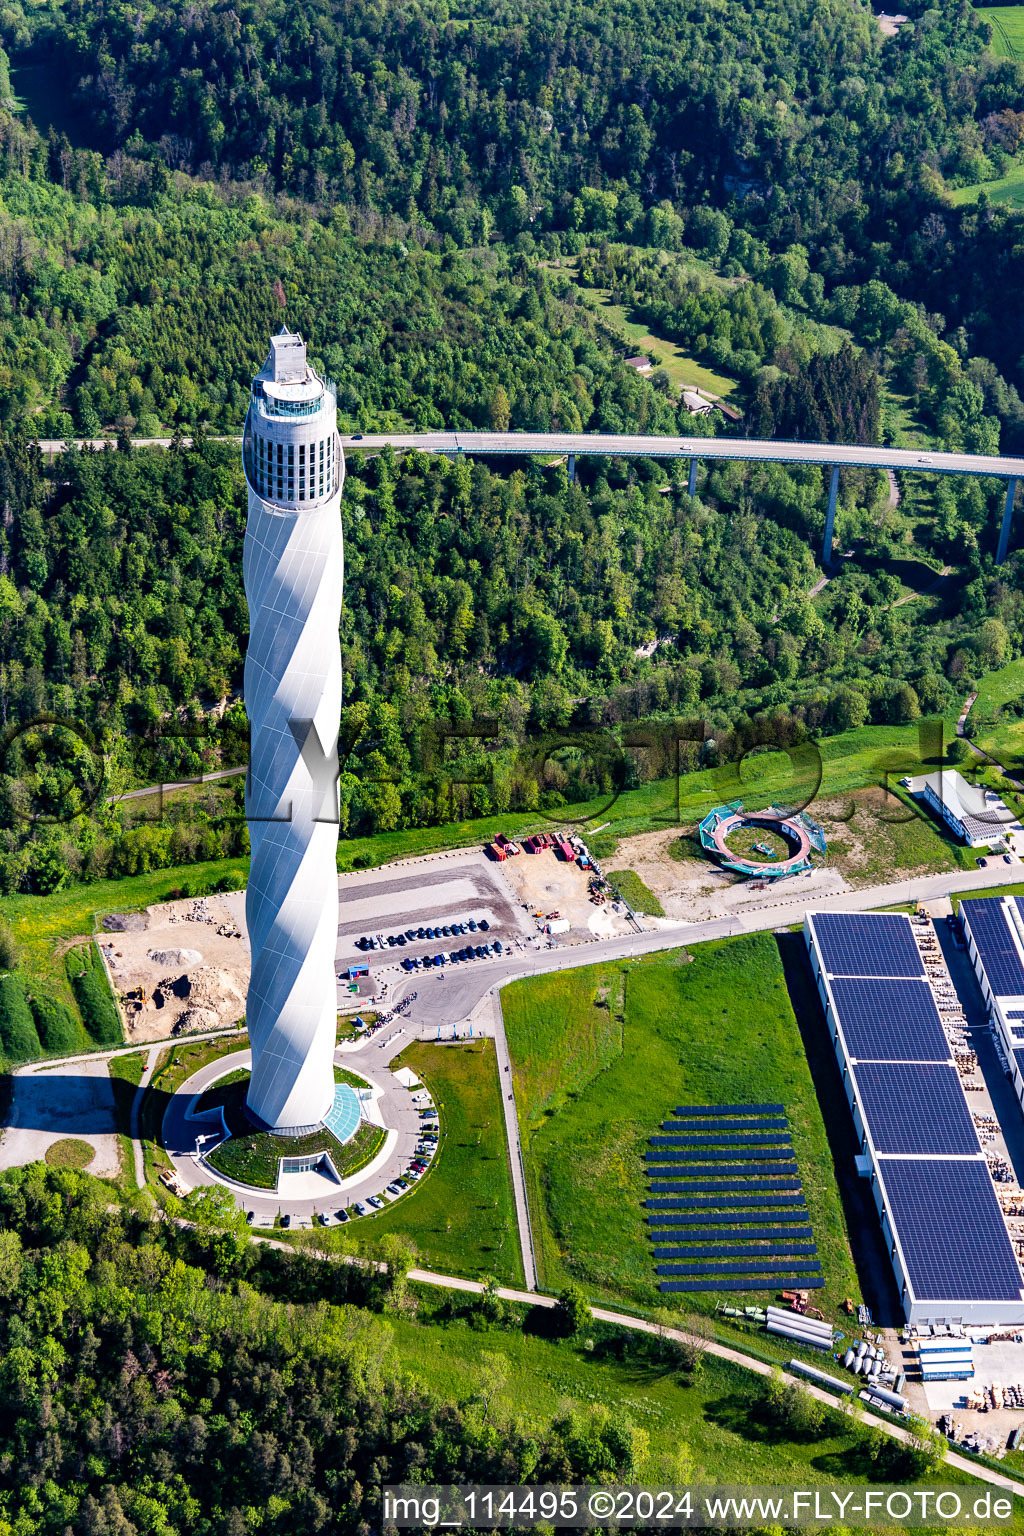 Site of the ThyssenKrupp testing tower for Speed elevators in Rottweil in Baden - Wuerttemberg. When finished the new landmark of the town of Rottweil will be the tallest structure in Baden-Wuerttemberg seen from above